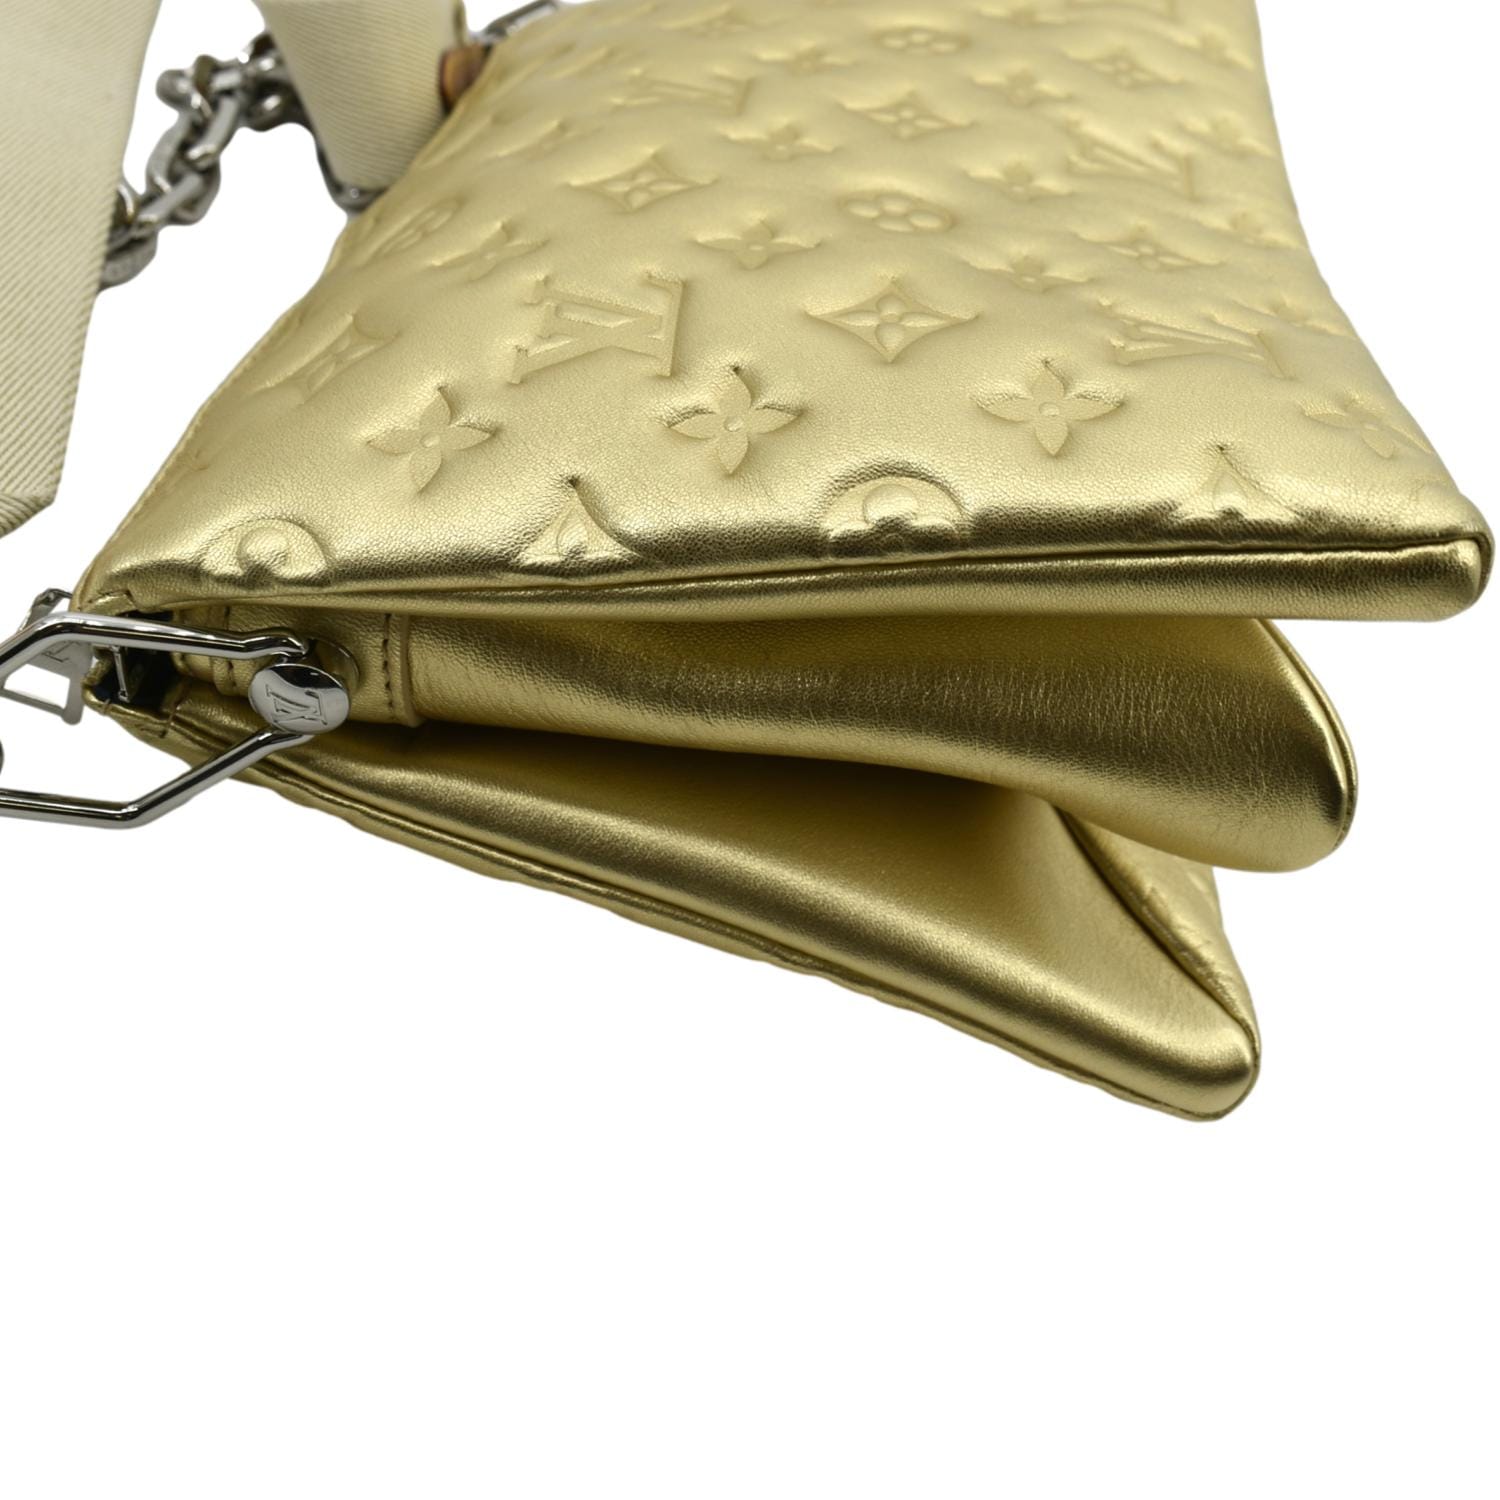 Coussin leather handbag Louis Vuitton Gold in Leather - 35908597